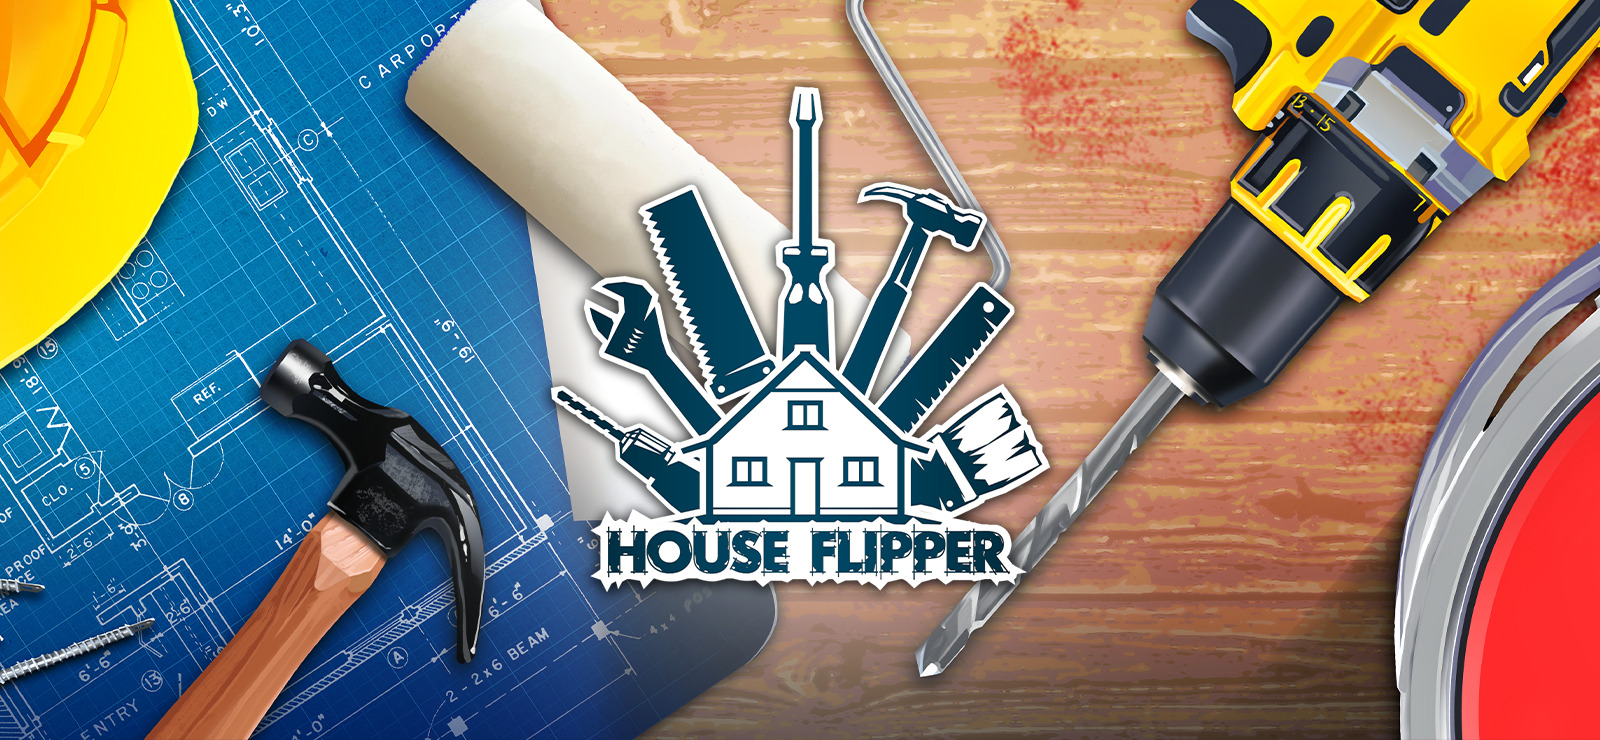 house flipper game free full download free no apps included